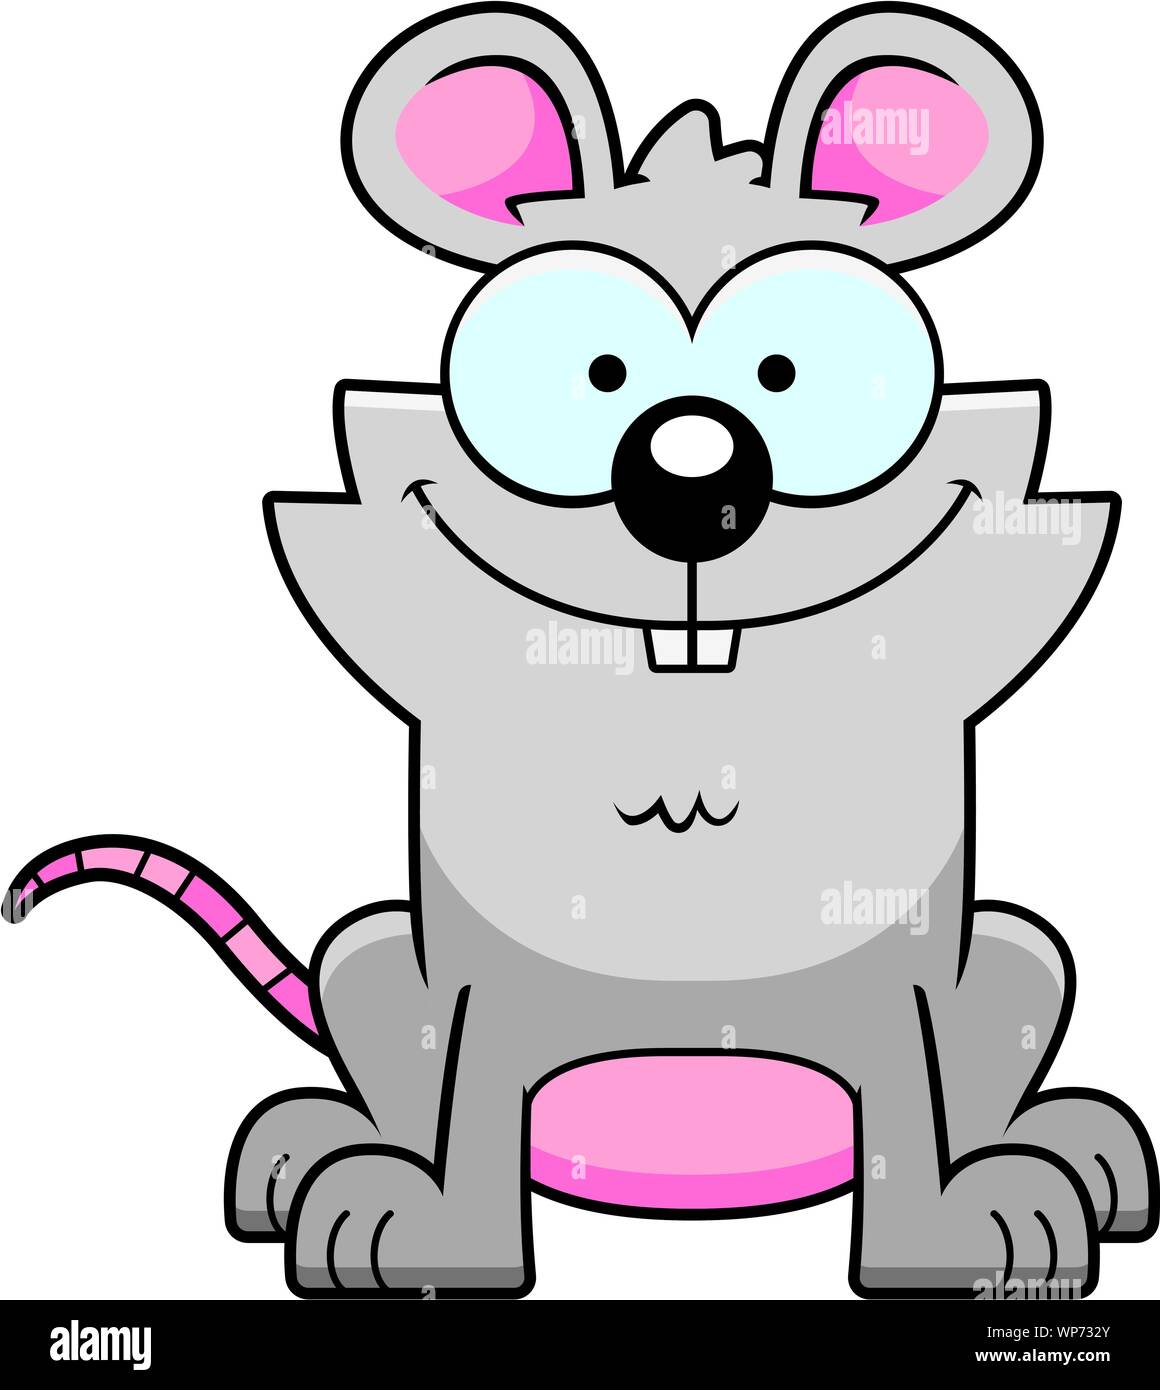 A cartoon illustration of a mouse smiling. Stock Vector